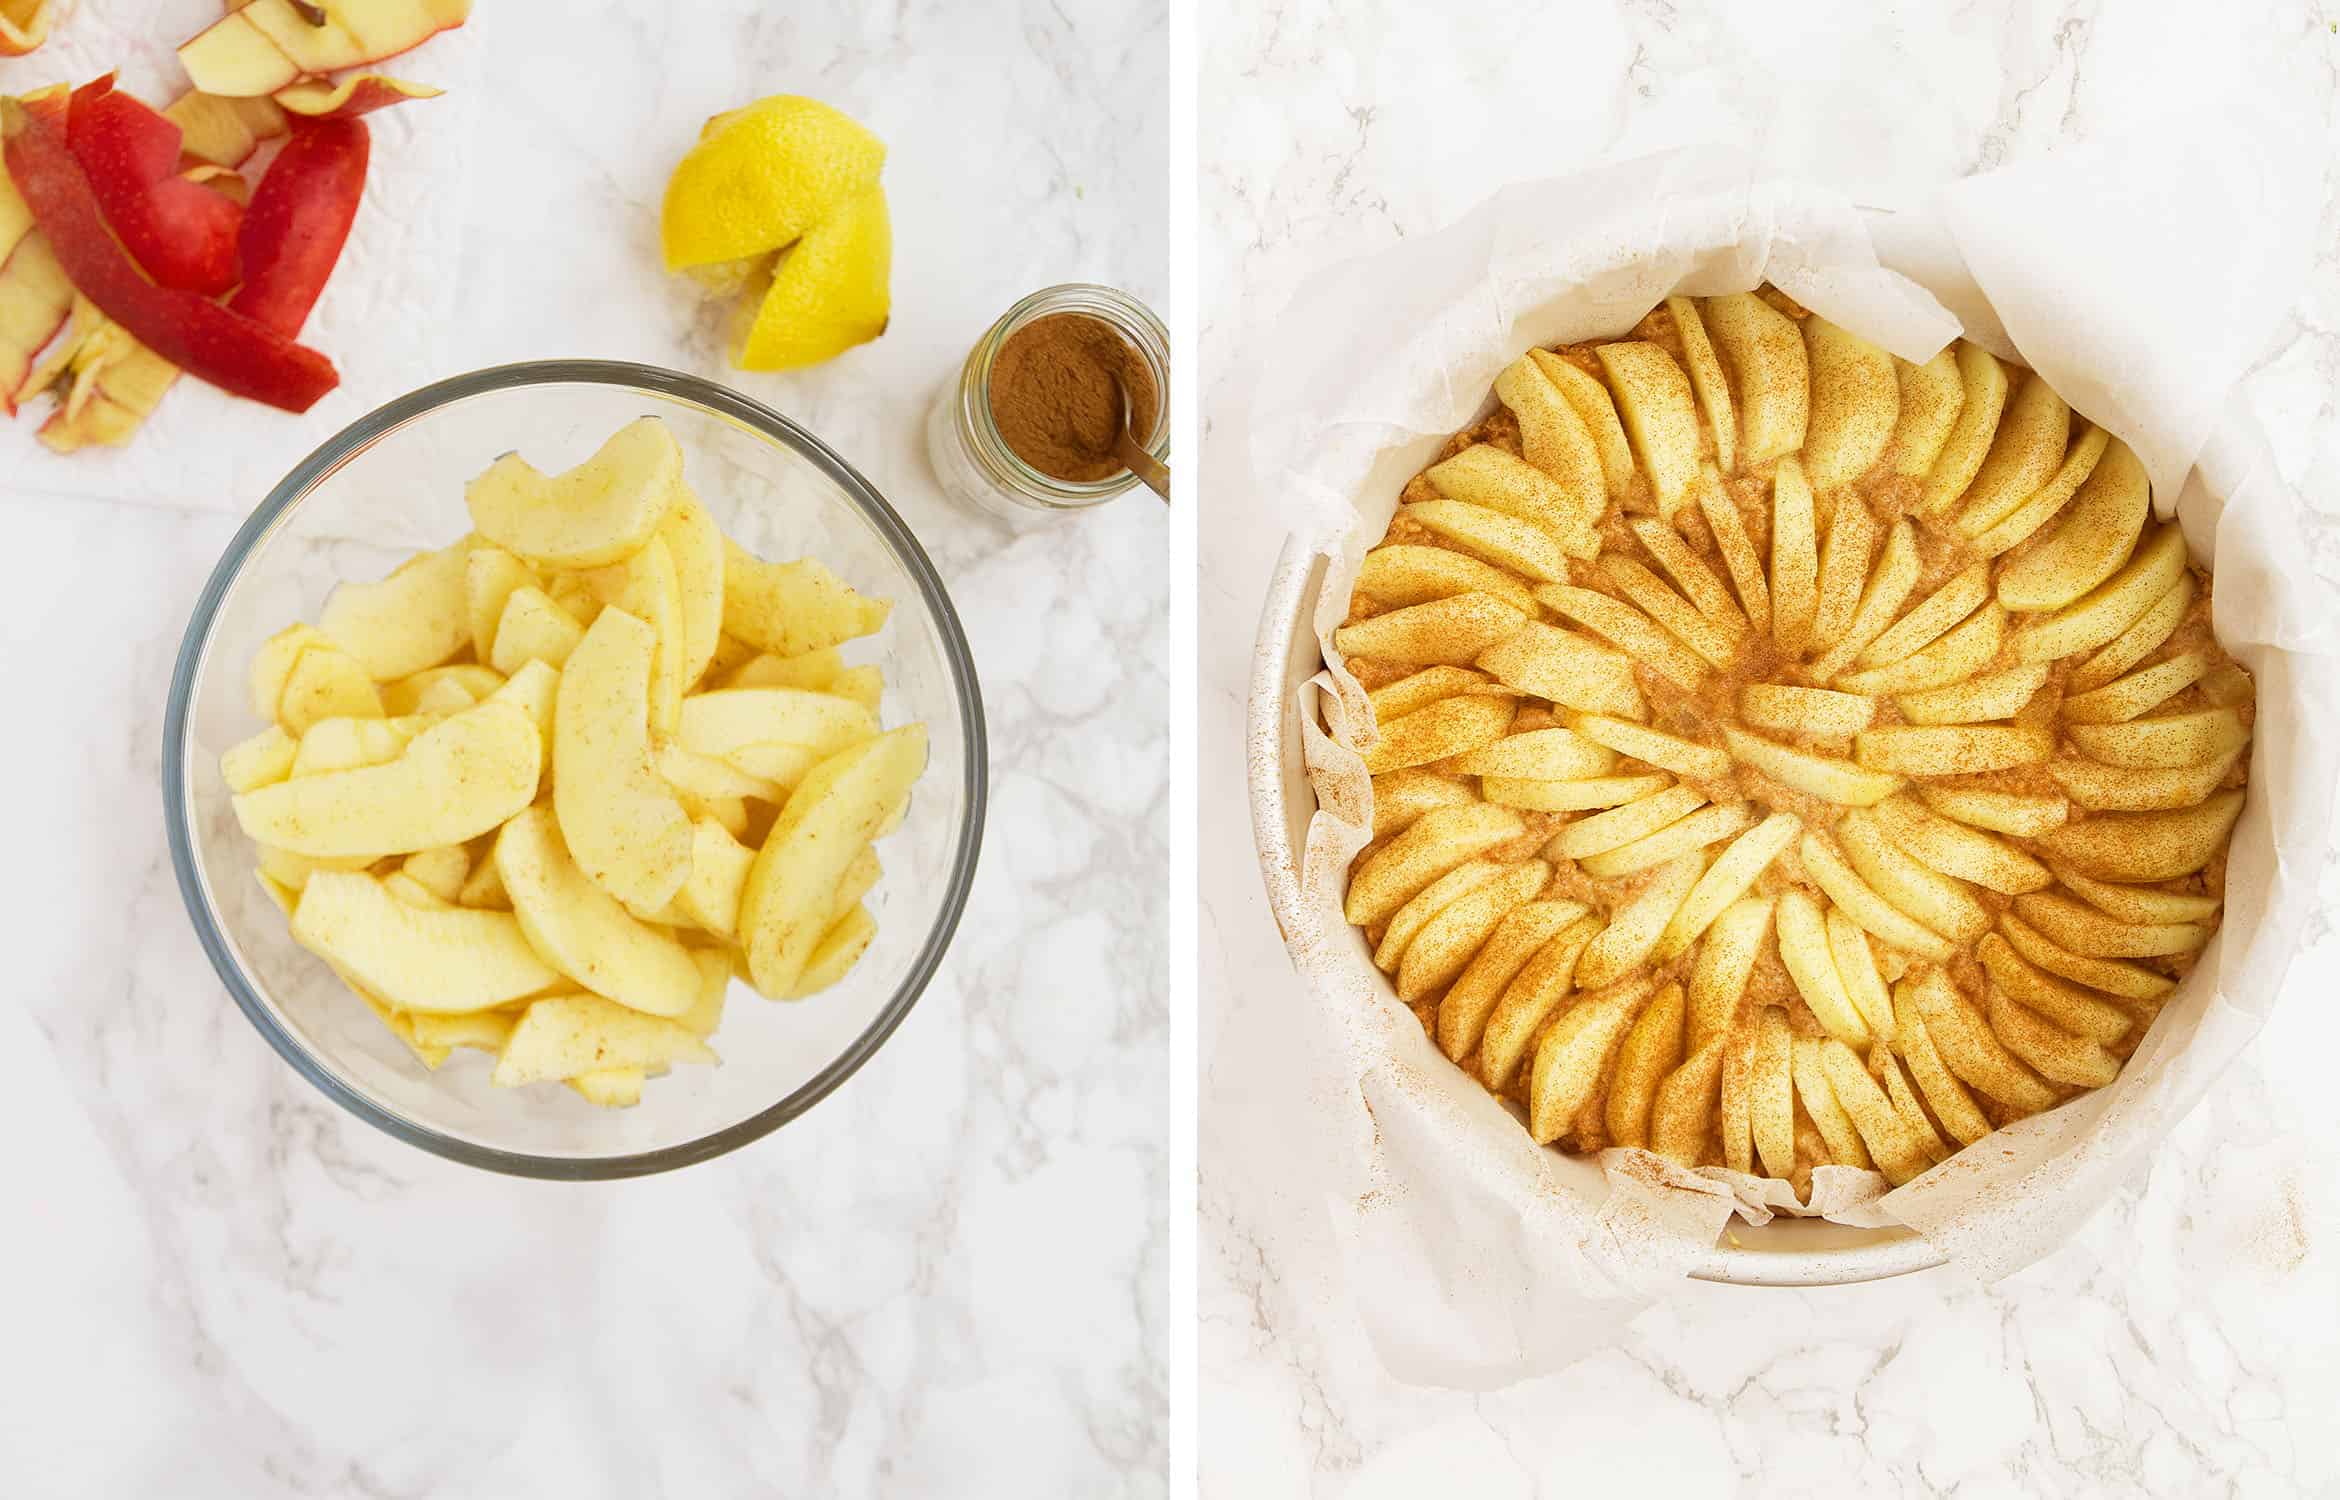 A glass bowl full of apple slices and a round tin with the apple cake before baking.